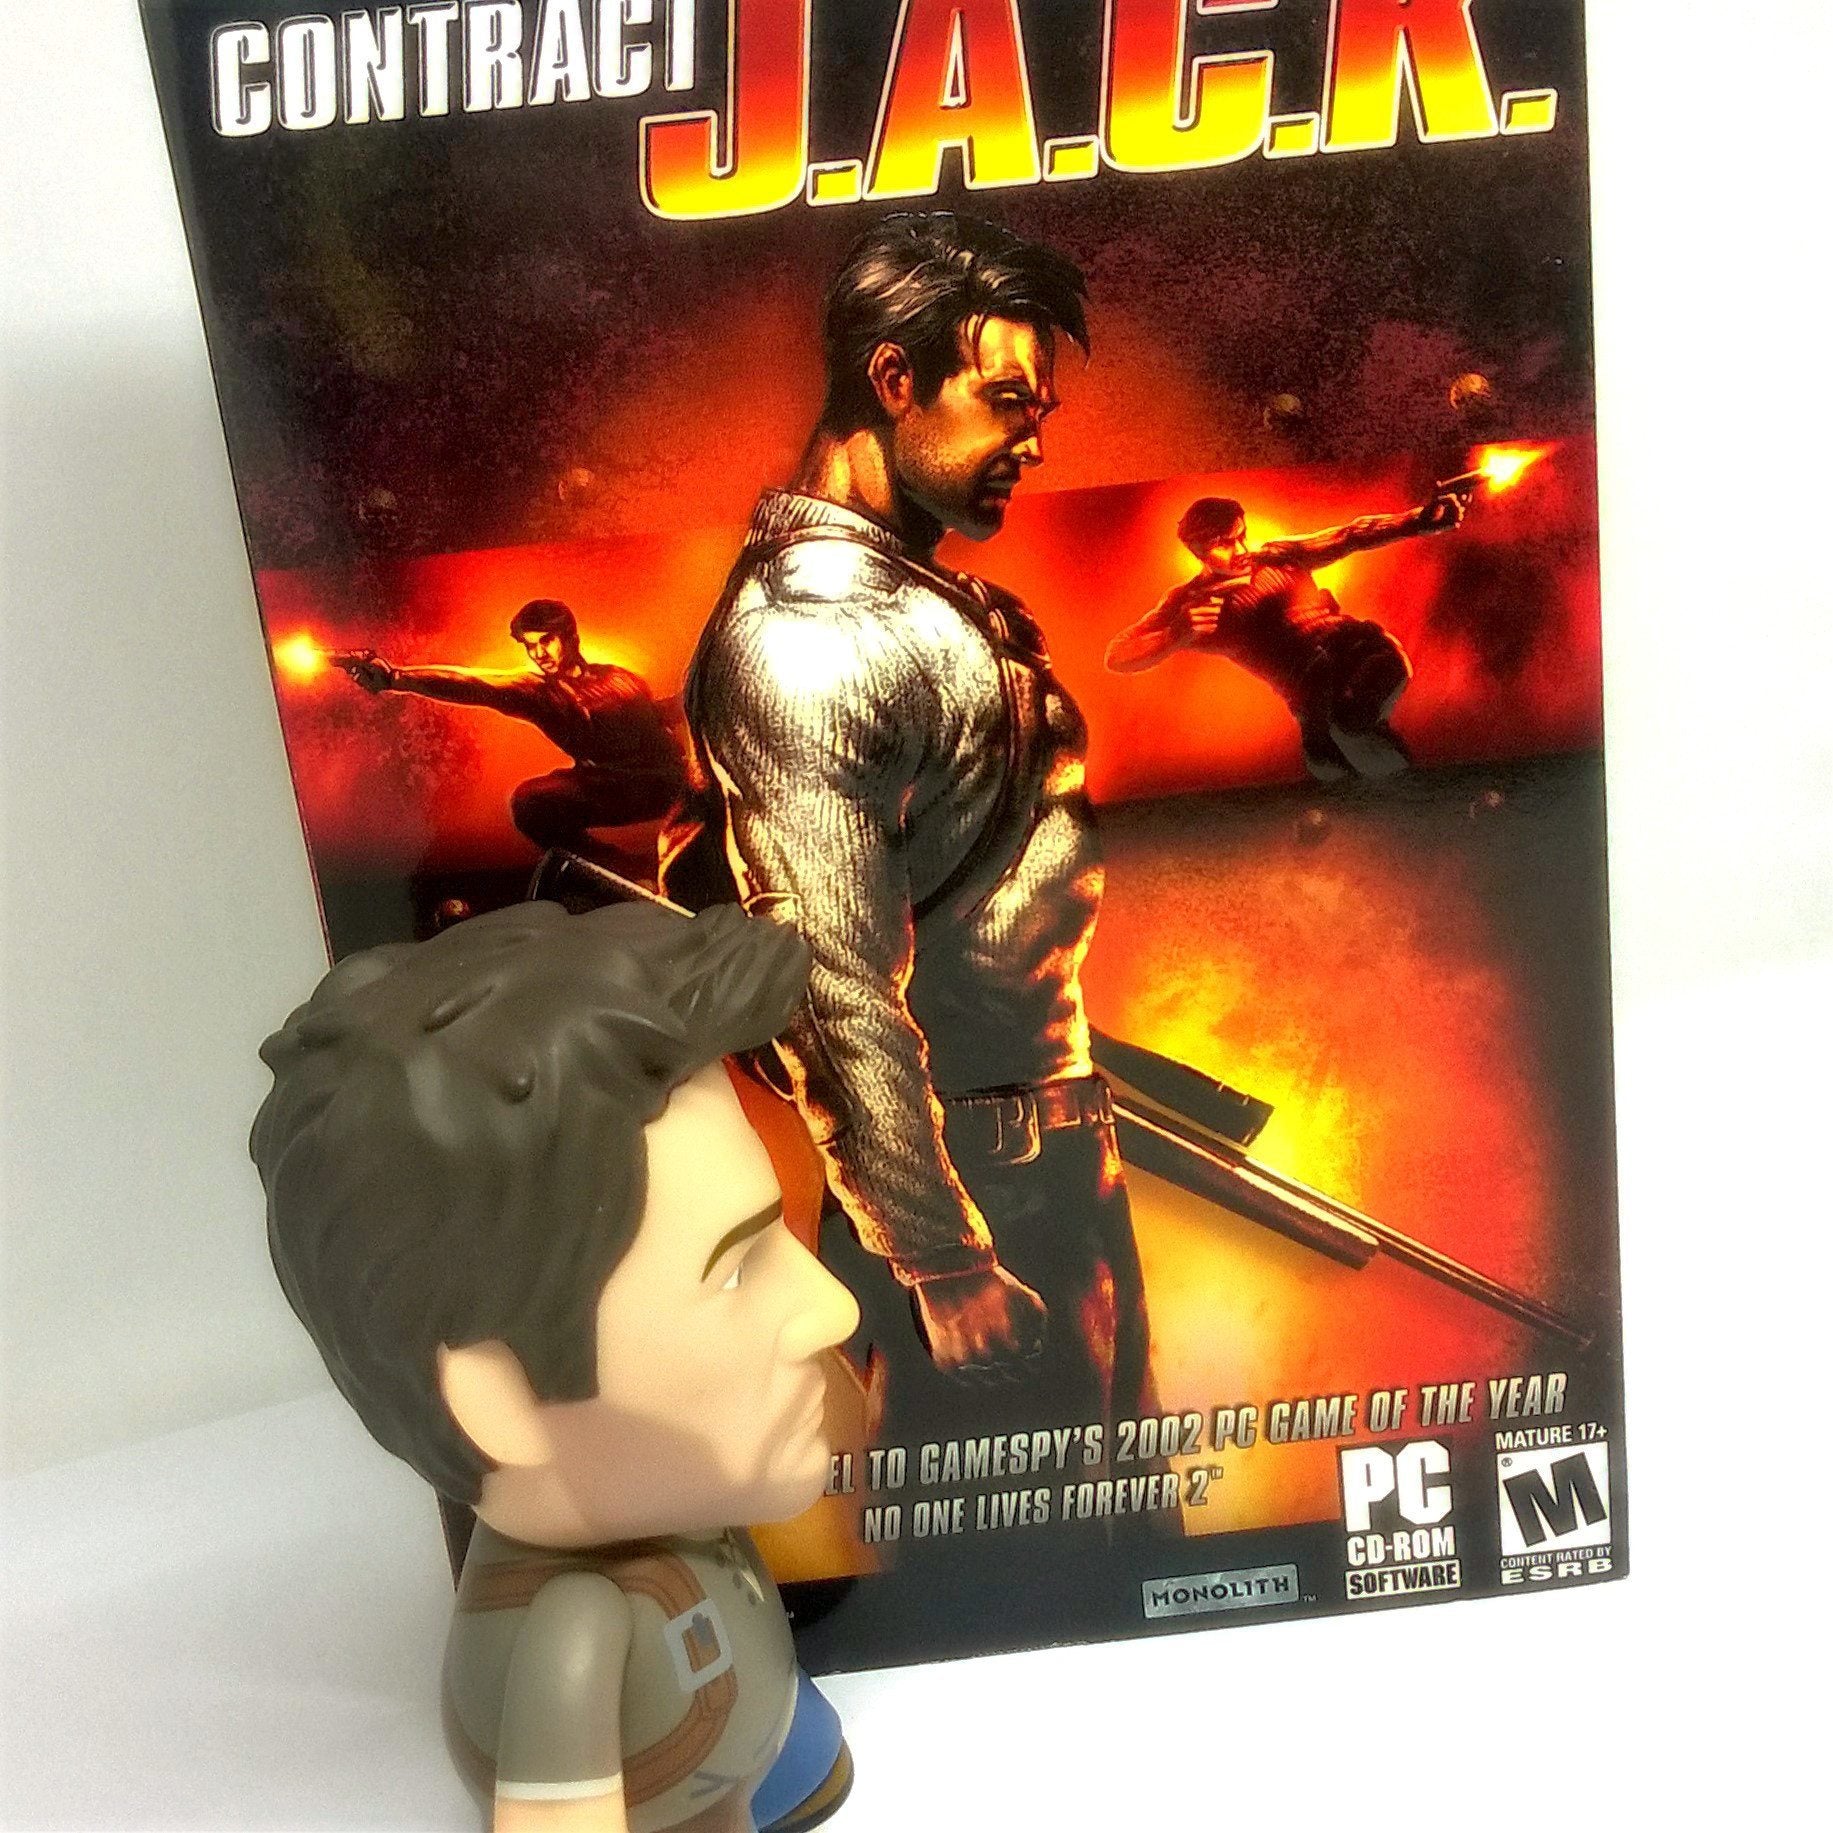 Contract J.A.C.K.